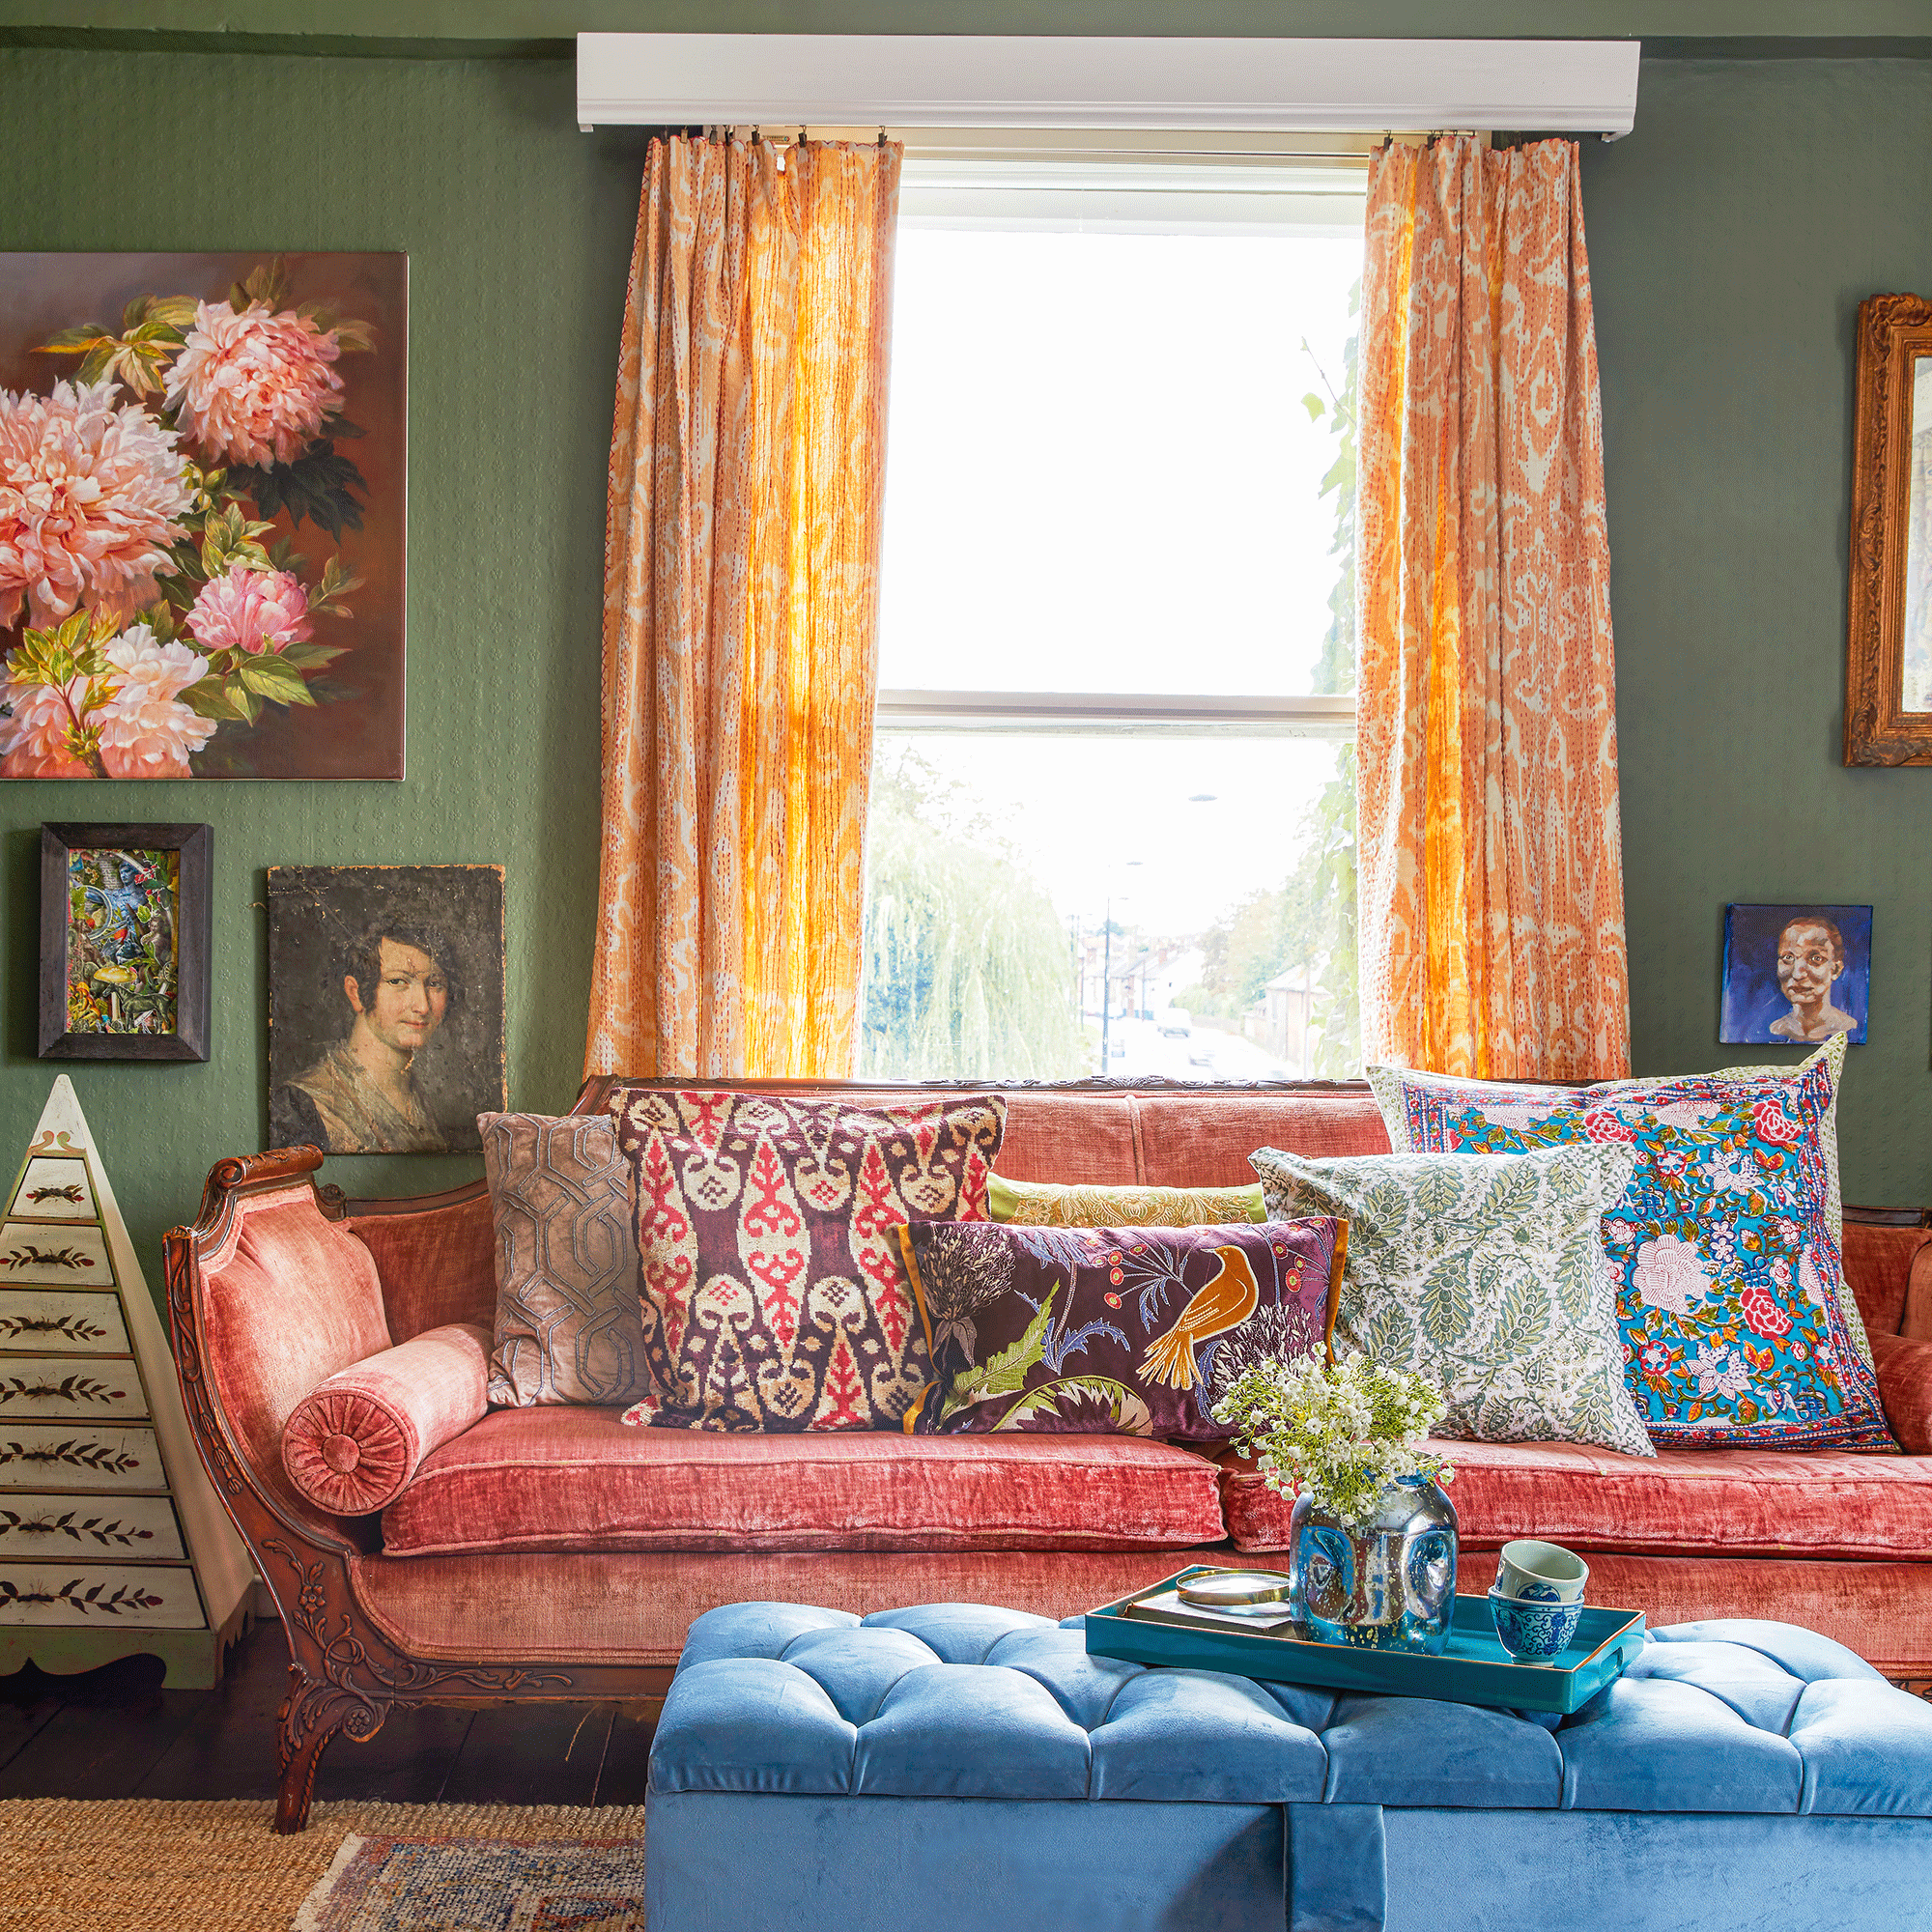 Green living room with orange curtains